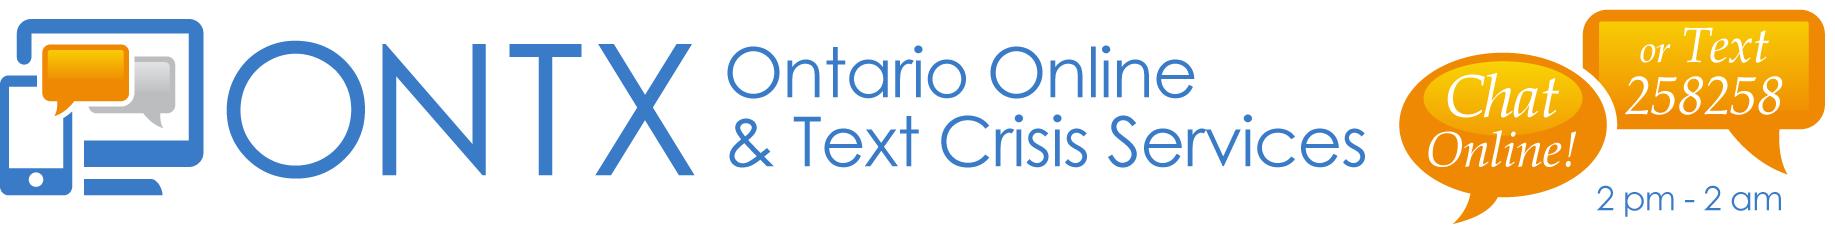 Ontario Online & Text Crisis Services information banner